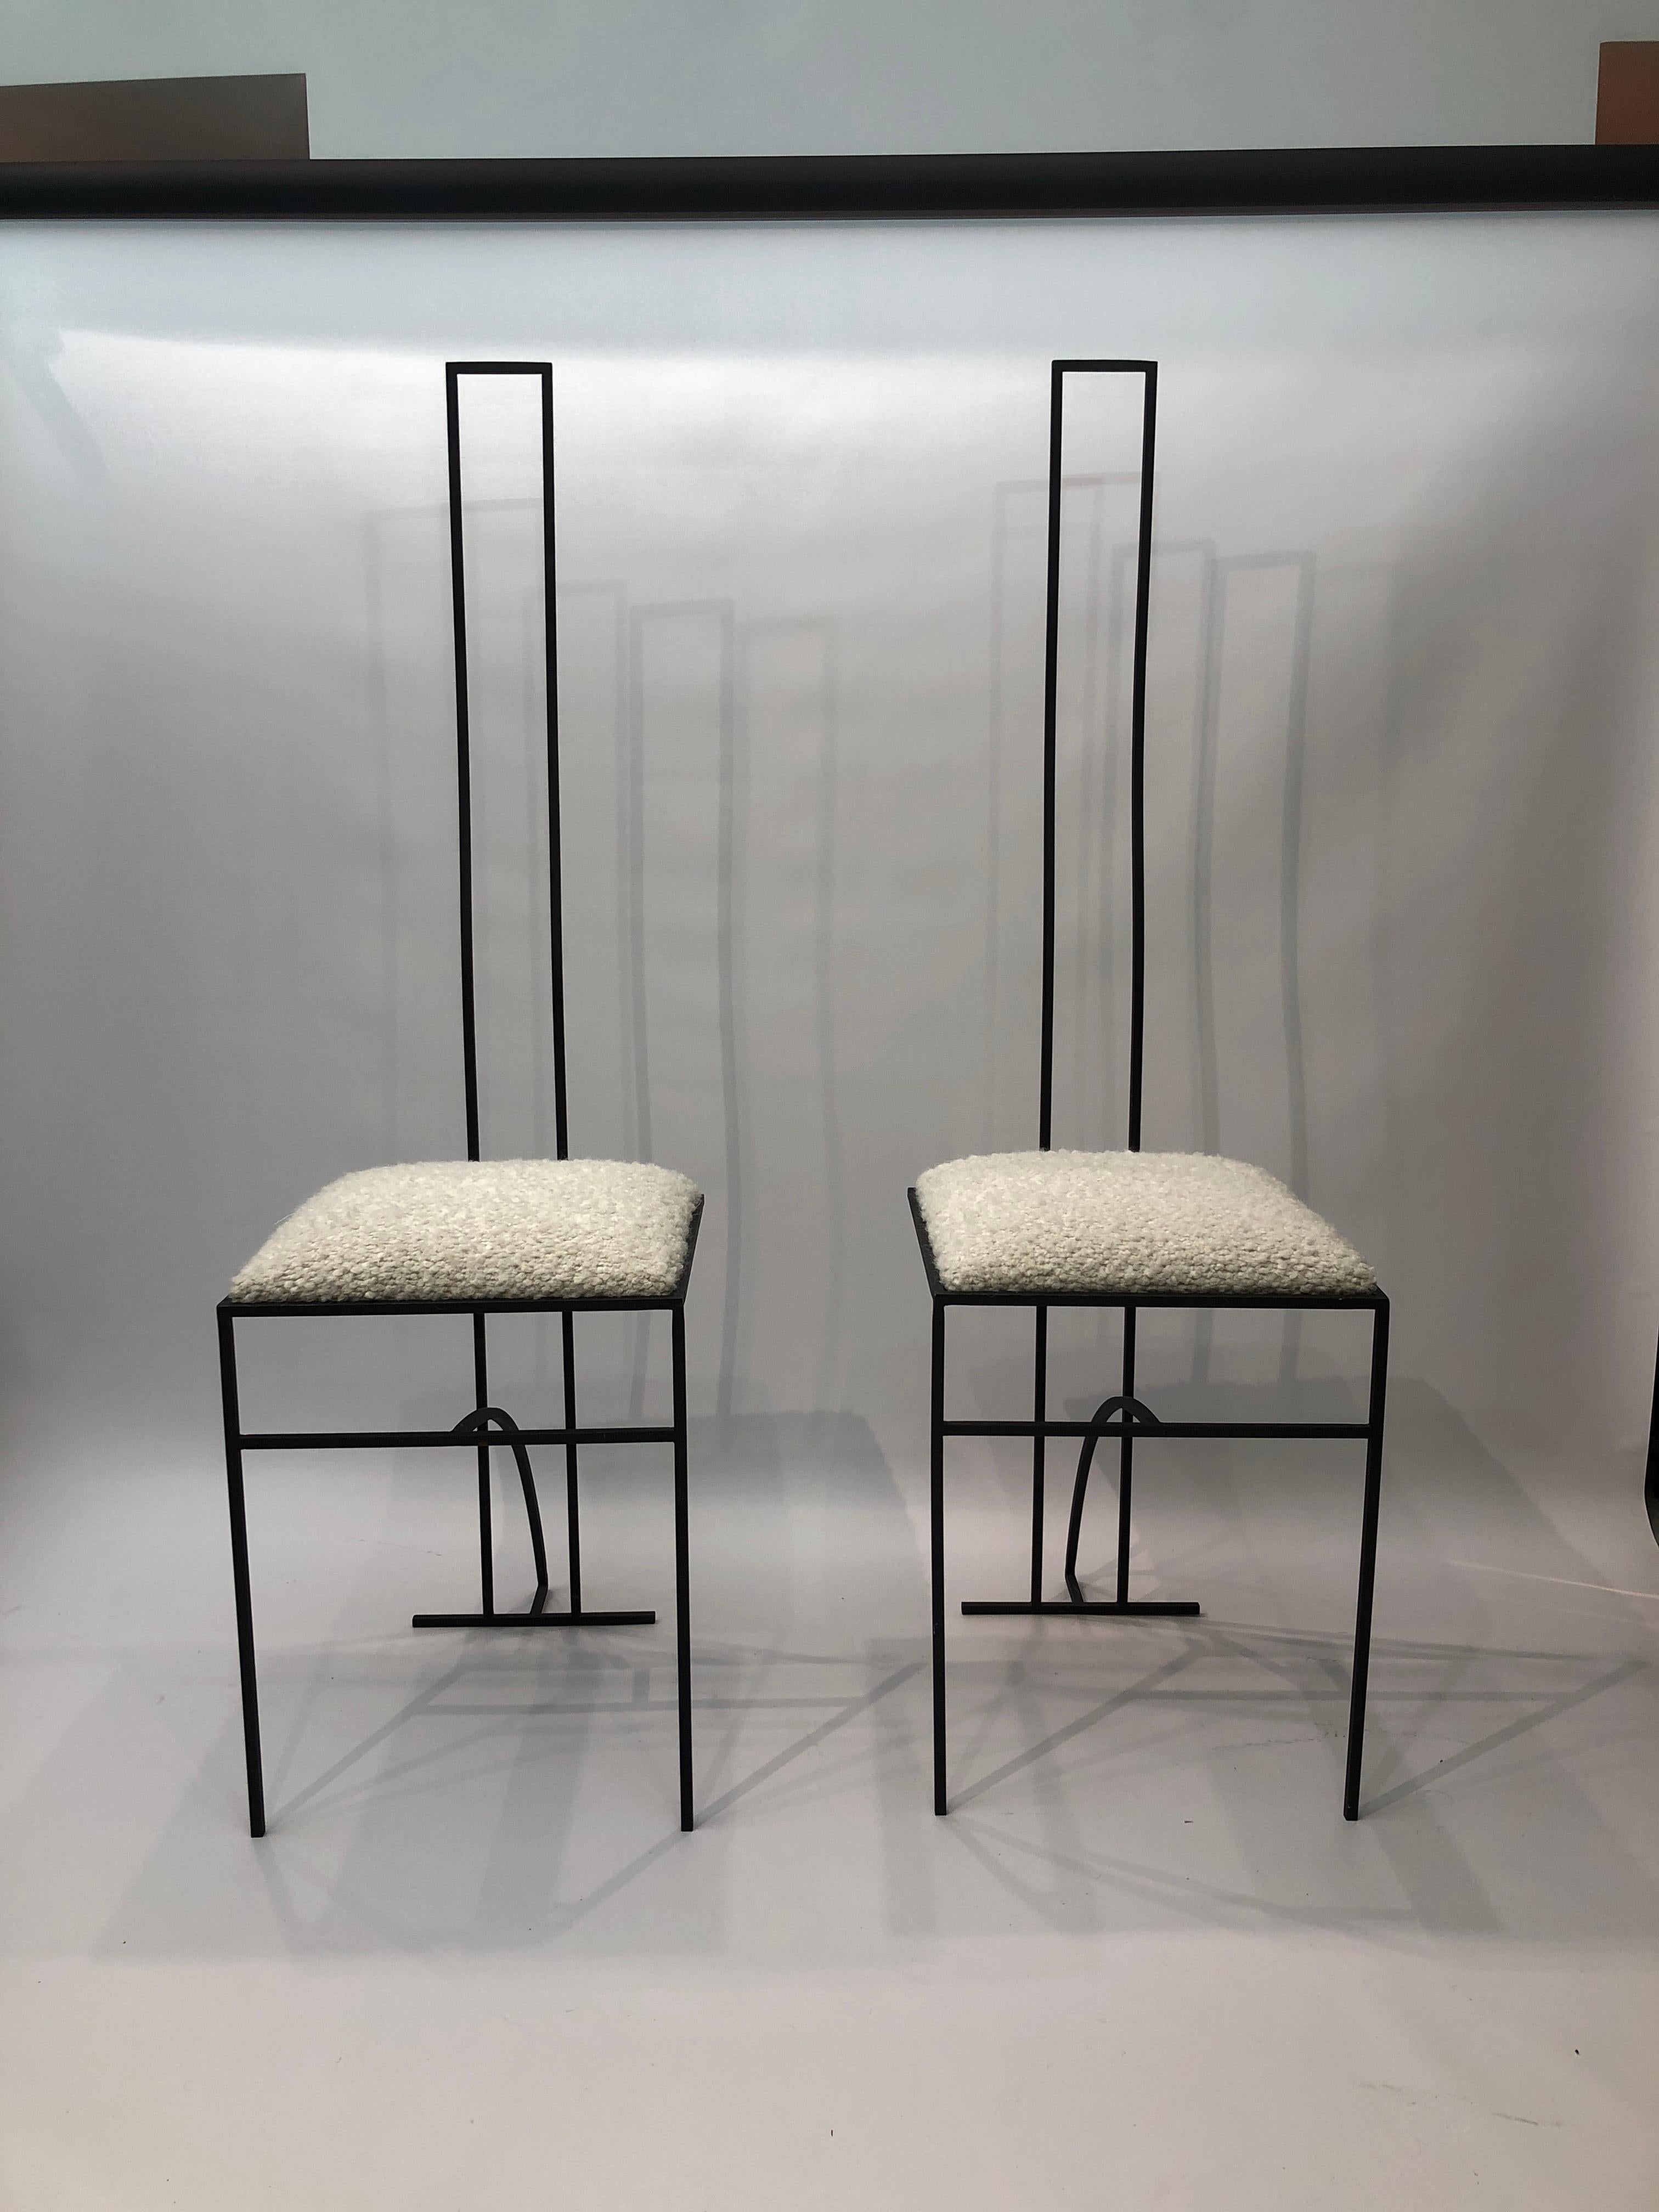 Pair of strictly minimal chairs from the 1980s with boucle seat upholstery giving a contrast of materials and texture making them more inviting with its fluffy feel. Simple geometric line with square seat.
The boucle upholstery fabric is from